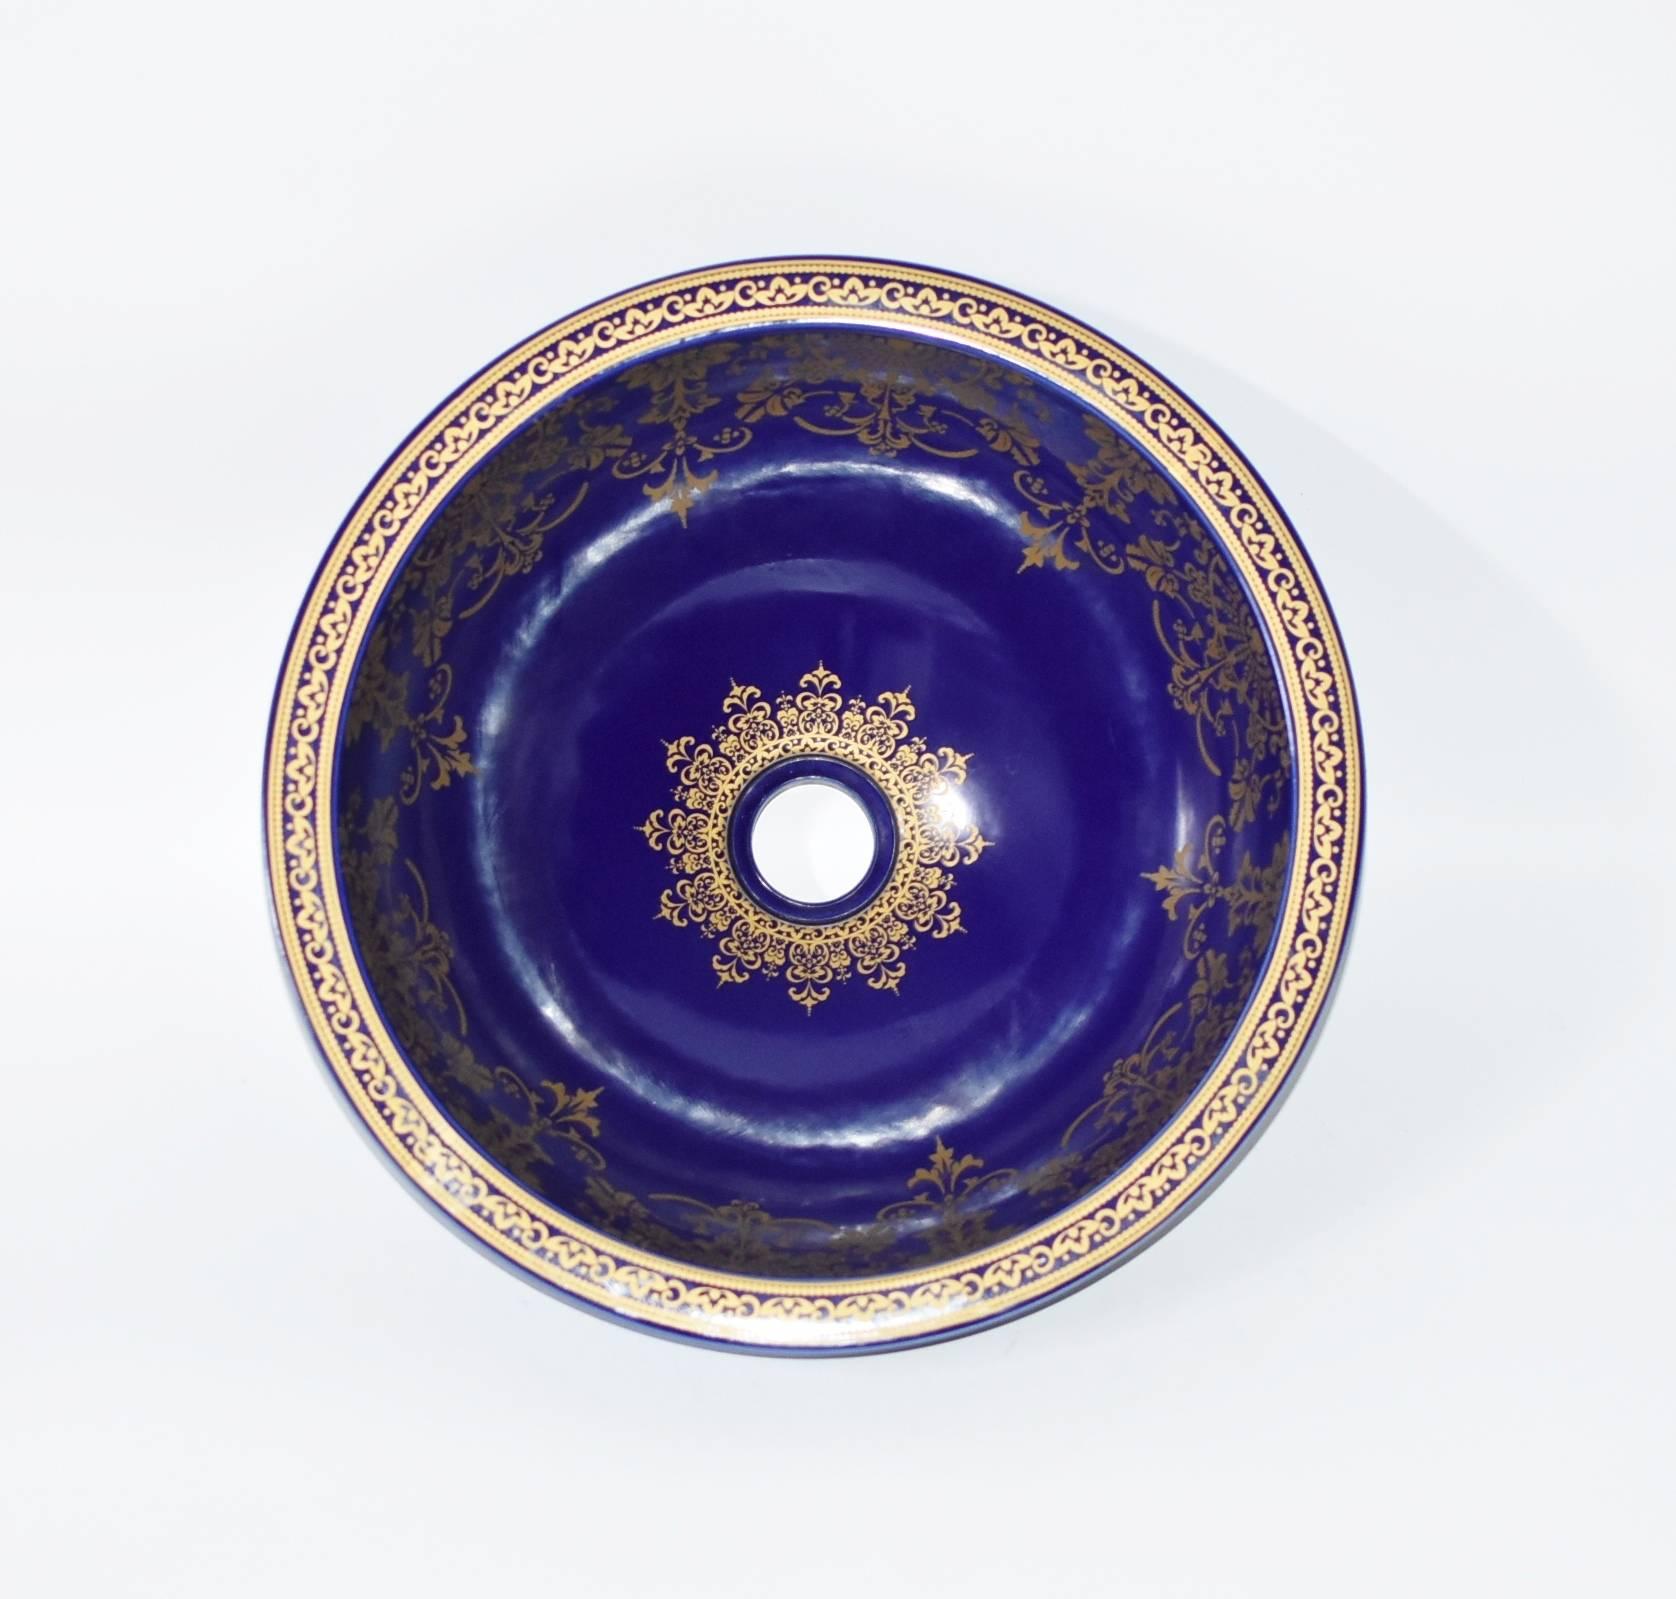 Beautiful cobalt blue sink with delicate golden cascading flowers. The sink is heavy and substantial, rings like a bell. Gorgeous blue is saturated and striking. Exterior gloss scroll artworks. One of a kind. Luxurious and exquisite, artistic and